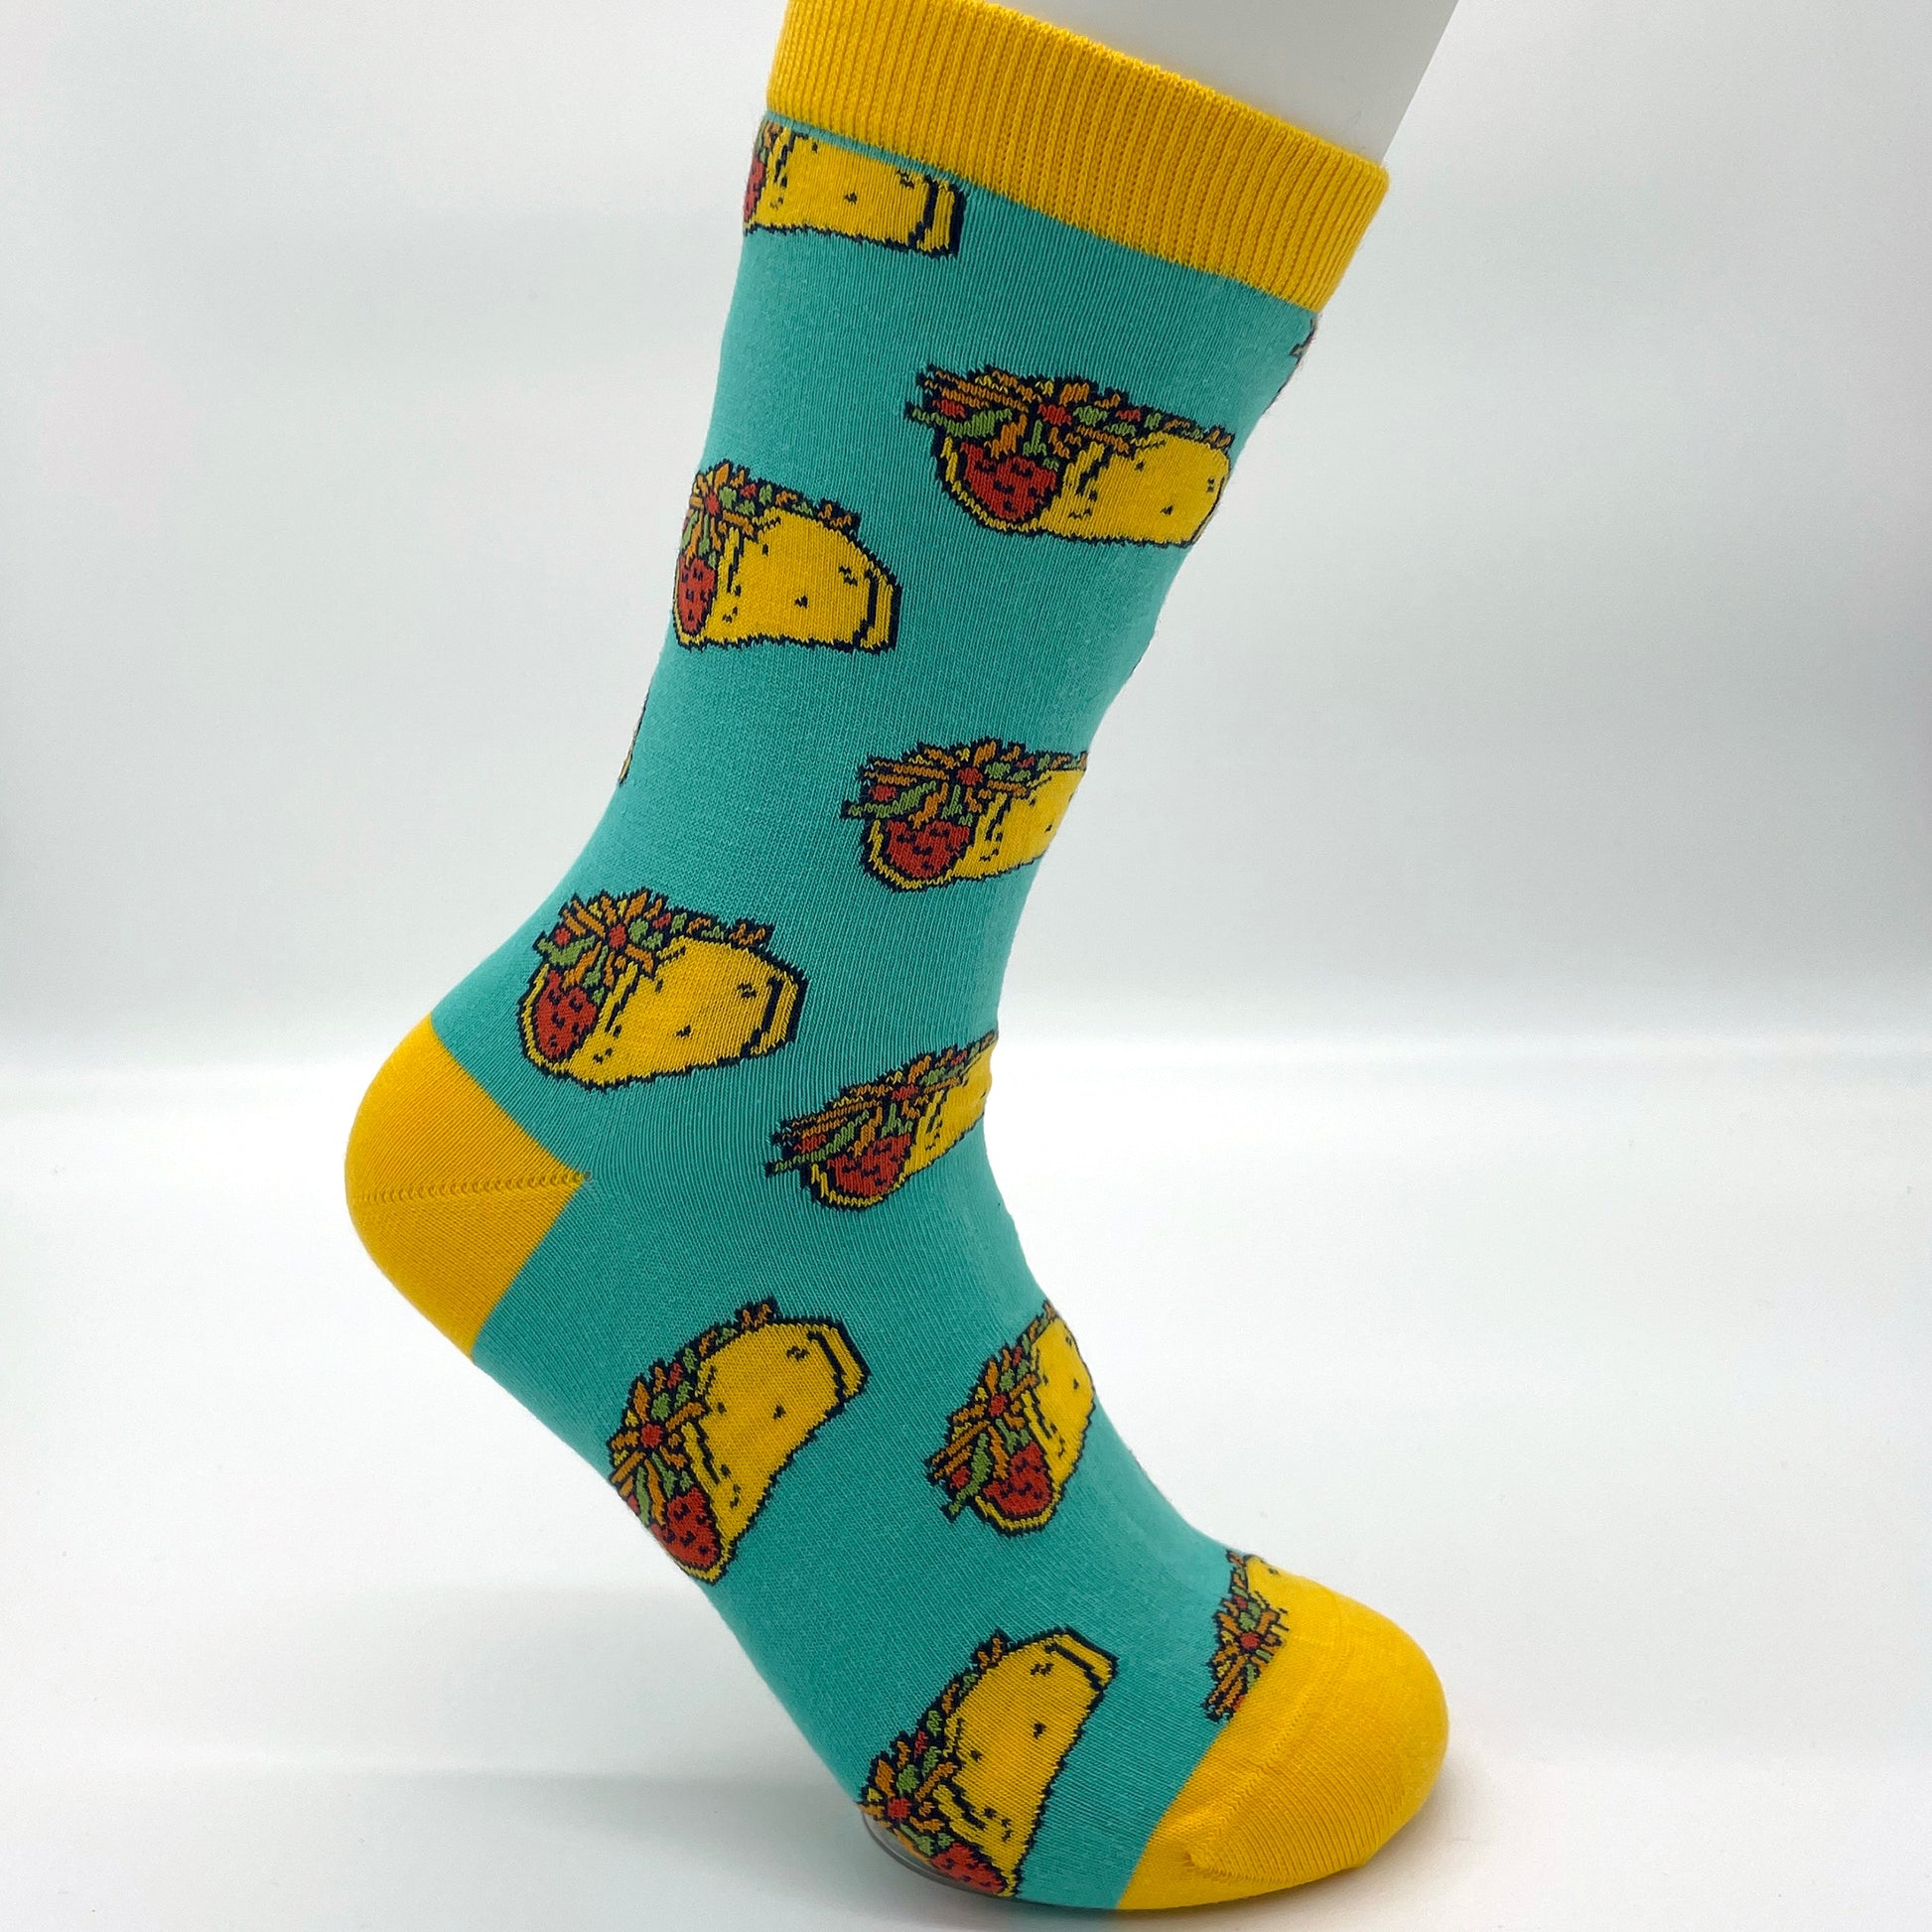 A white sock mannequin sports a turquoise sock patterned with hard-shell tacos. The welt, heel and toe of the sock are yellow.